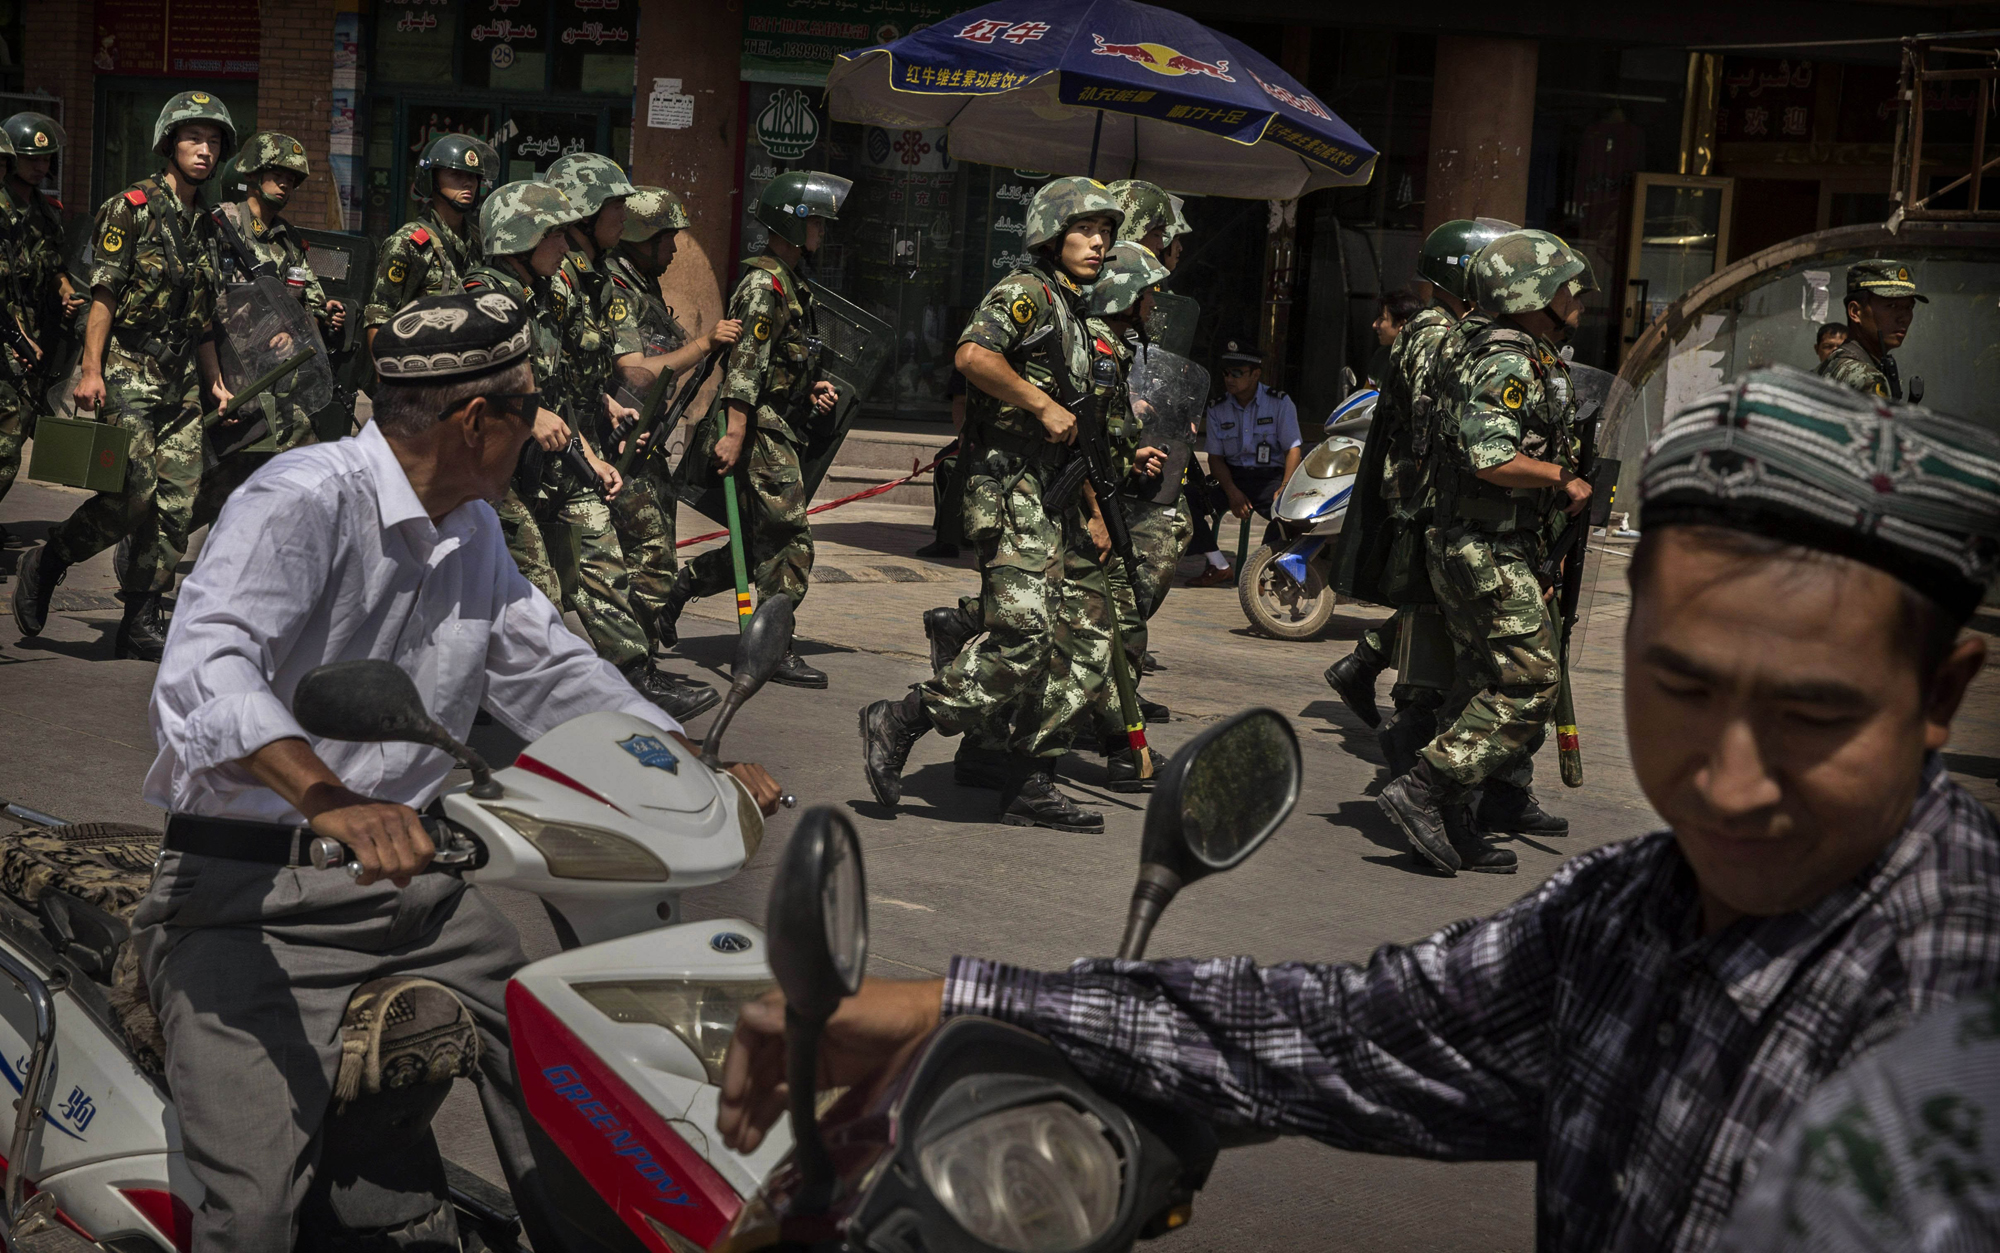 Chinese soldiers patrolling in old Kashgar, Xinjiang Province, July 30, 2014.